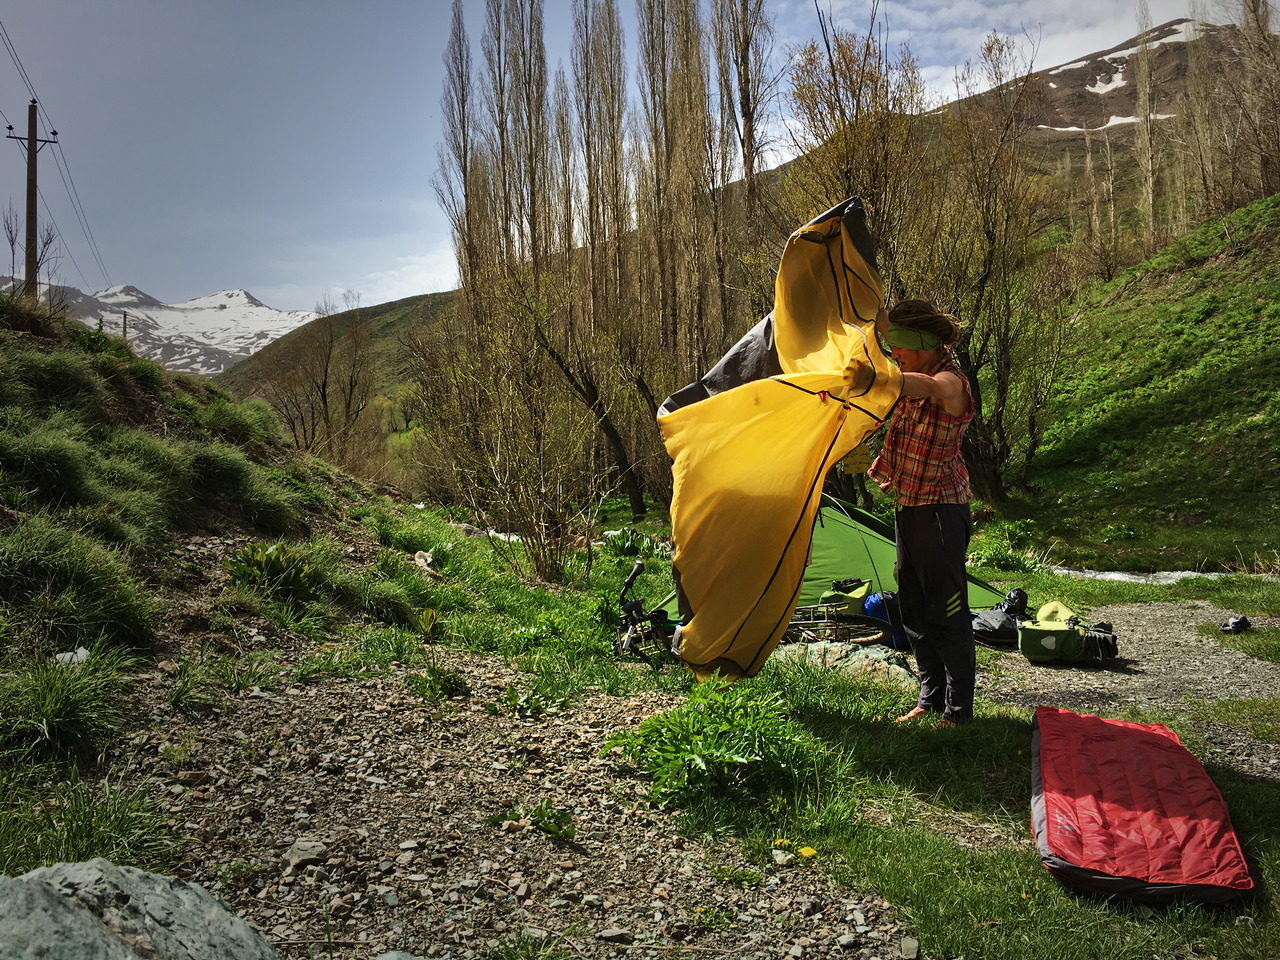 Cleaning my tent in Iran